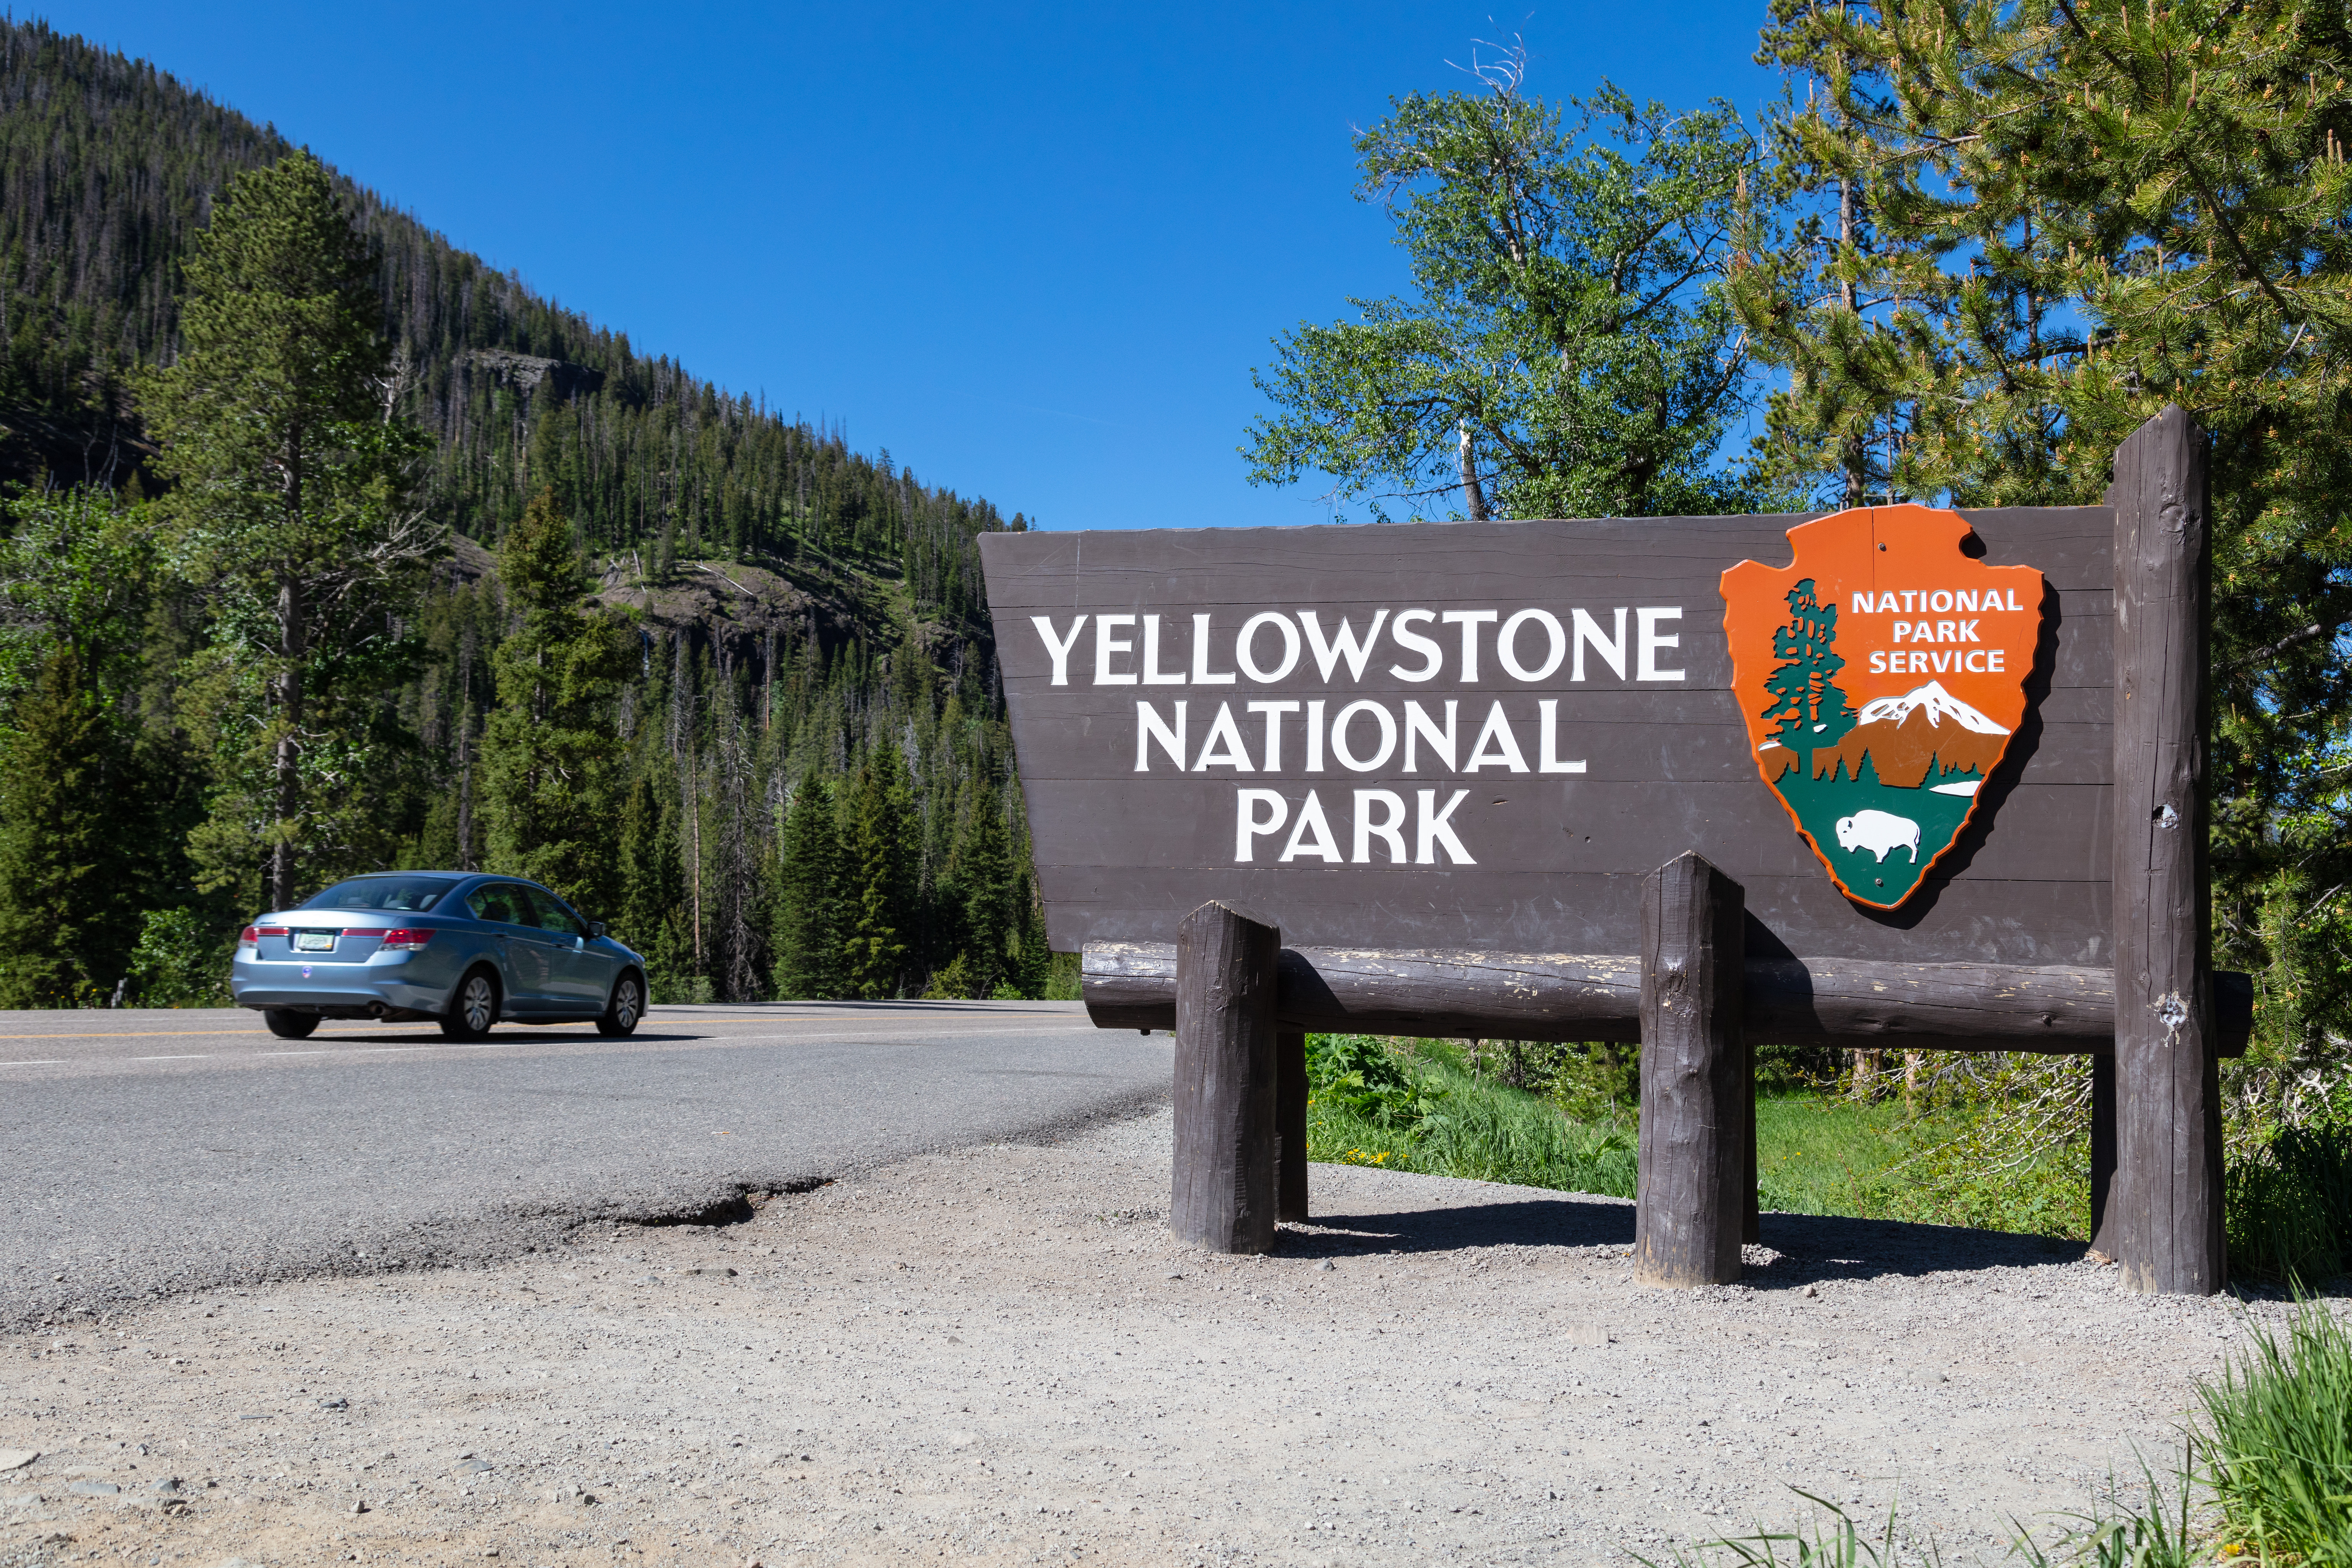 a large wooden sign next to a road with text: "Yellowstone National Park"